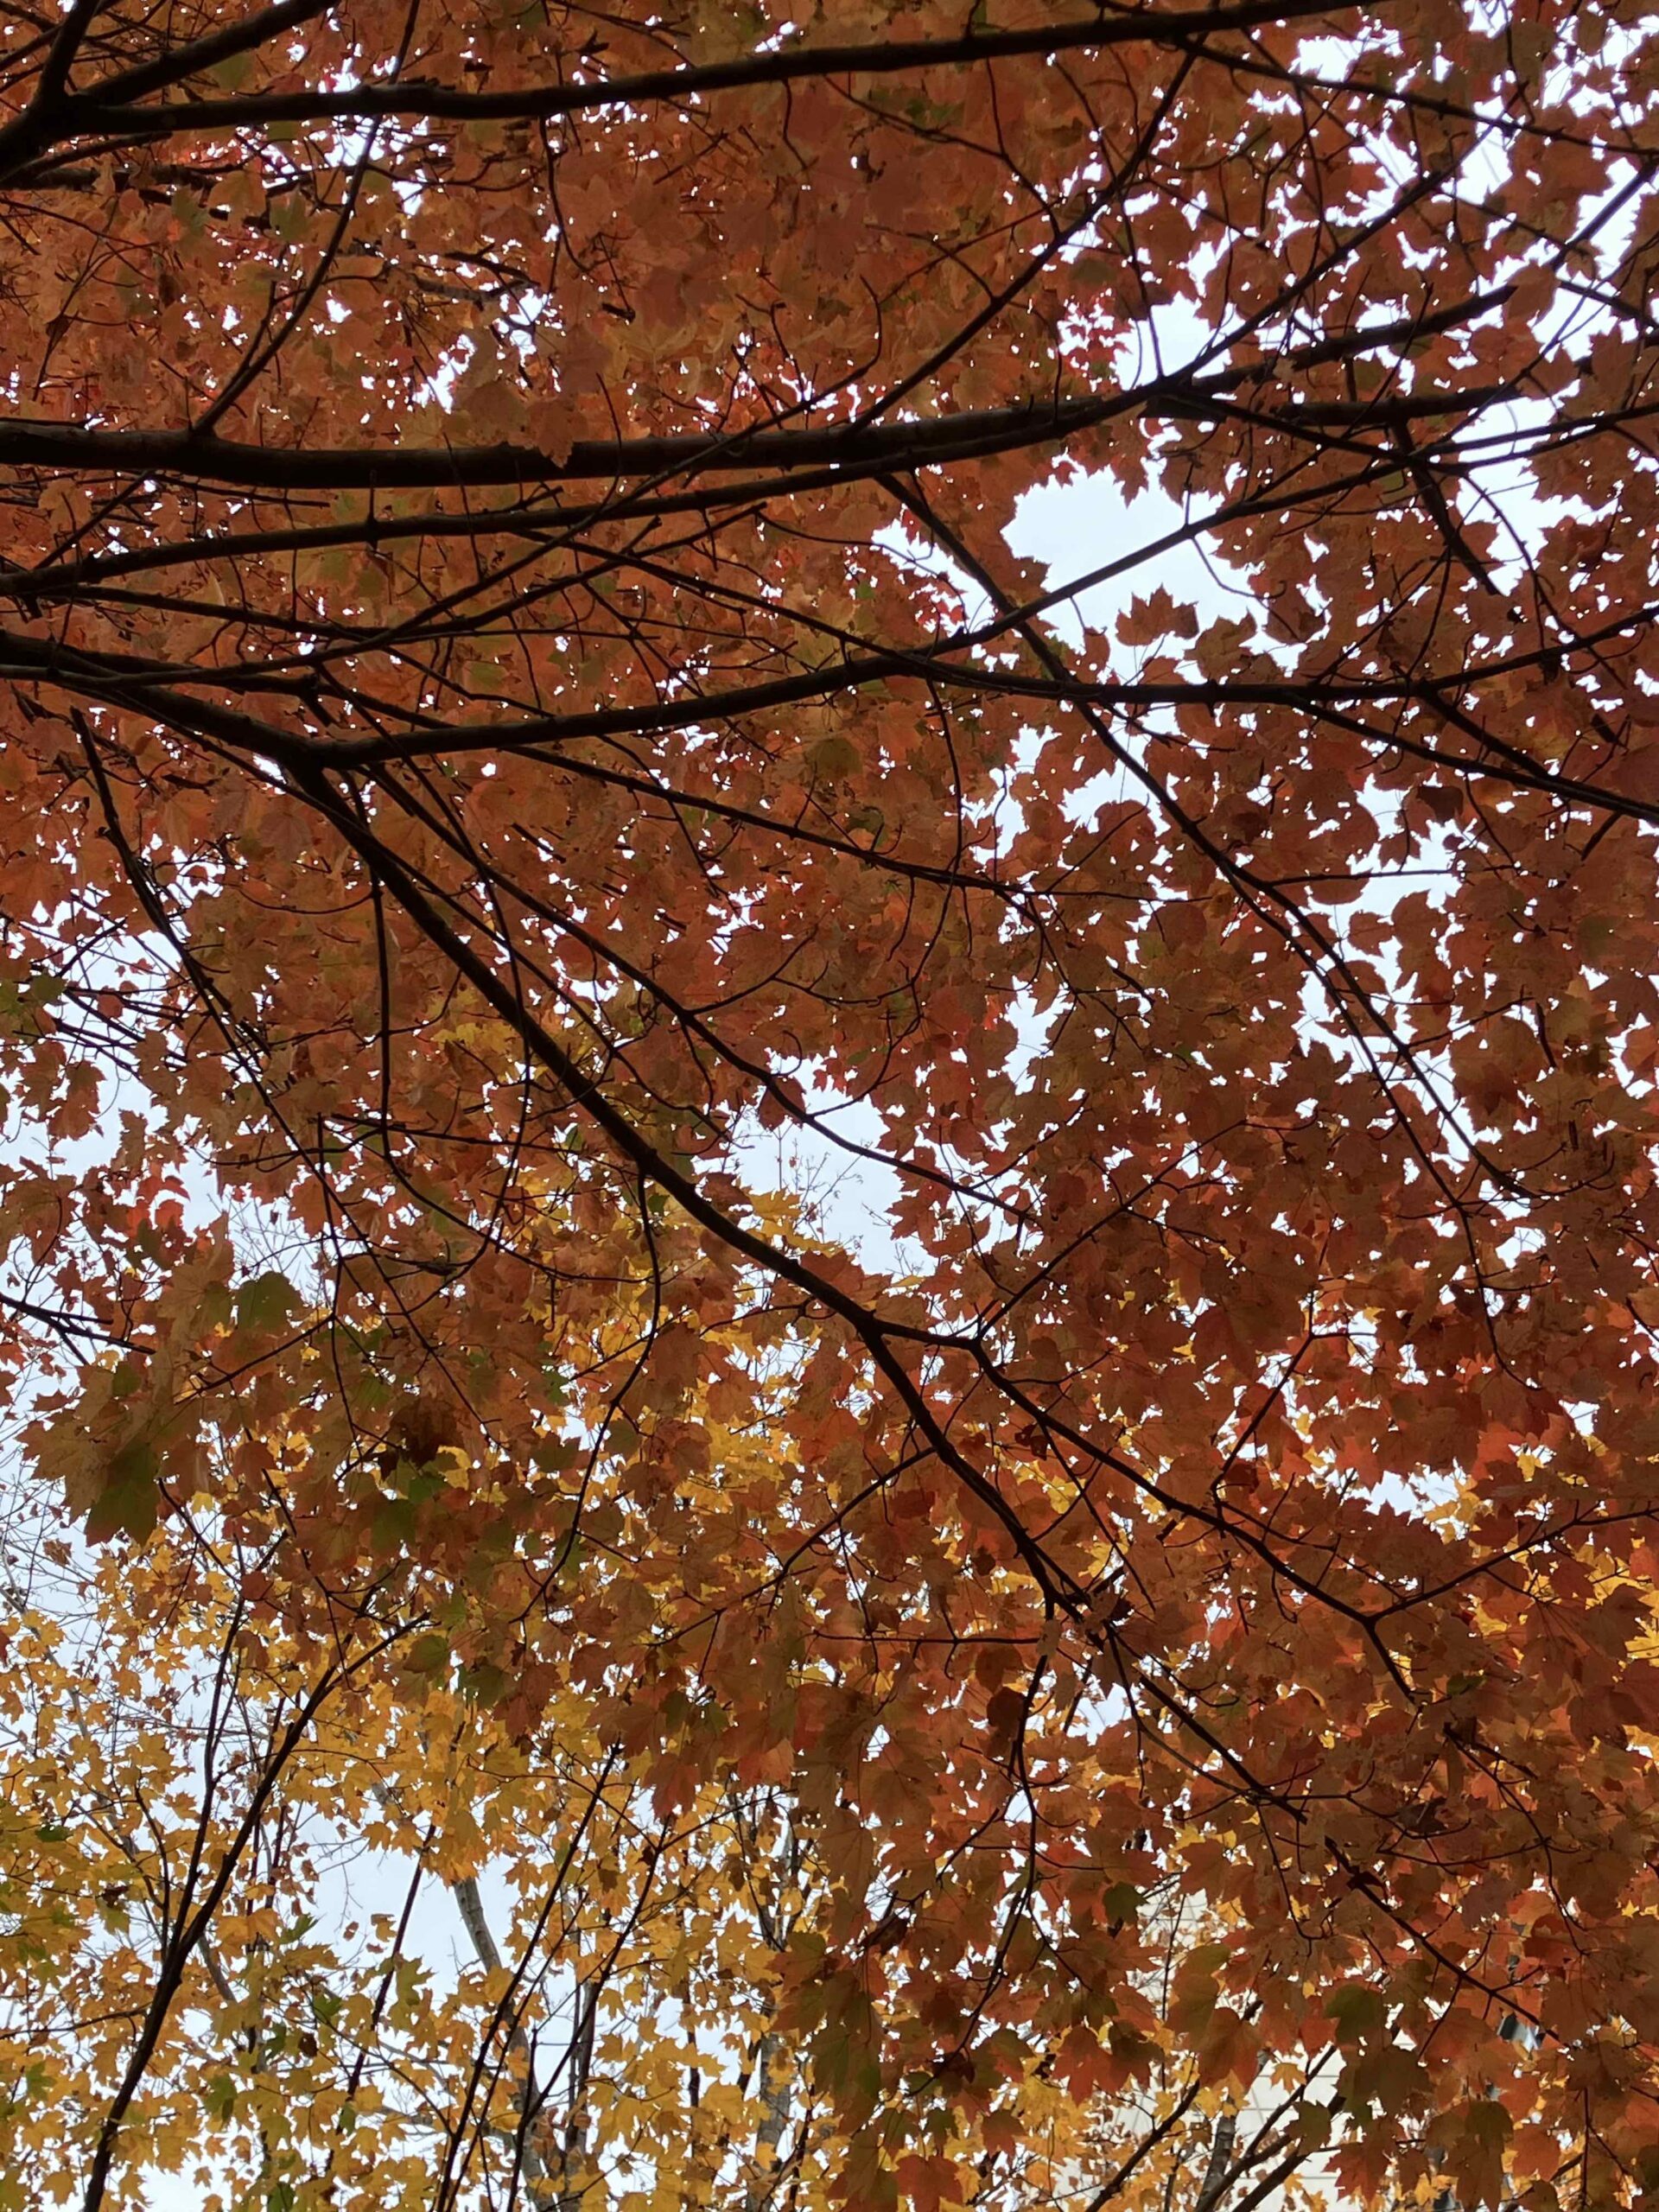 Colorful tree leaves are photographed from below. Leafy branches of two trees are visible. Most of the visible leaves are orange, though some of the leaves from the same tree have green centers and orange tips. The tree in the background has primarily yellow leaves with a few green leaves mixed in.